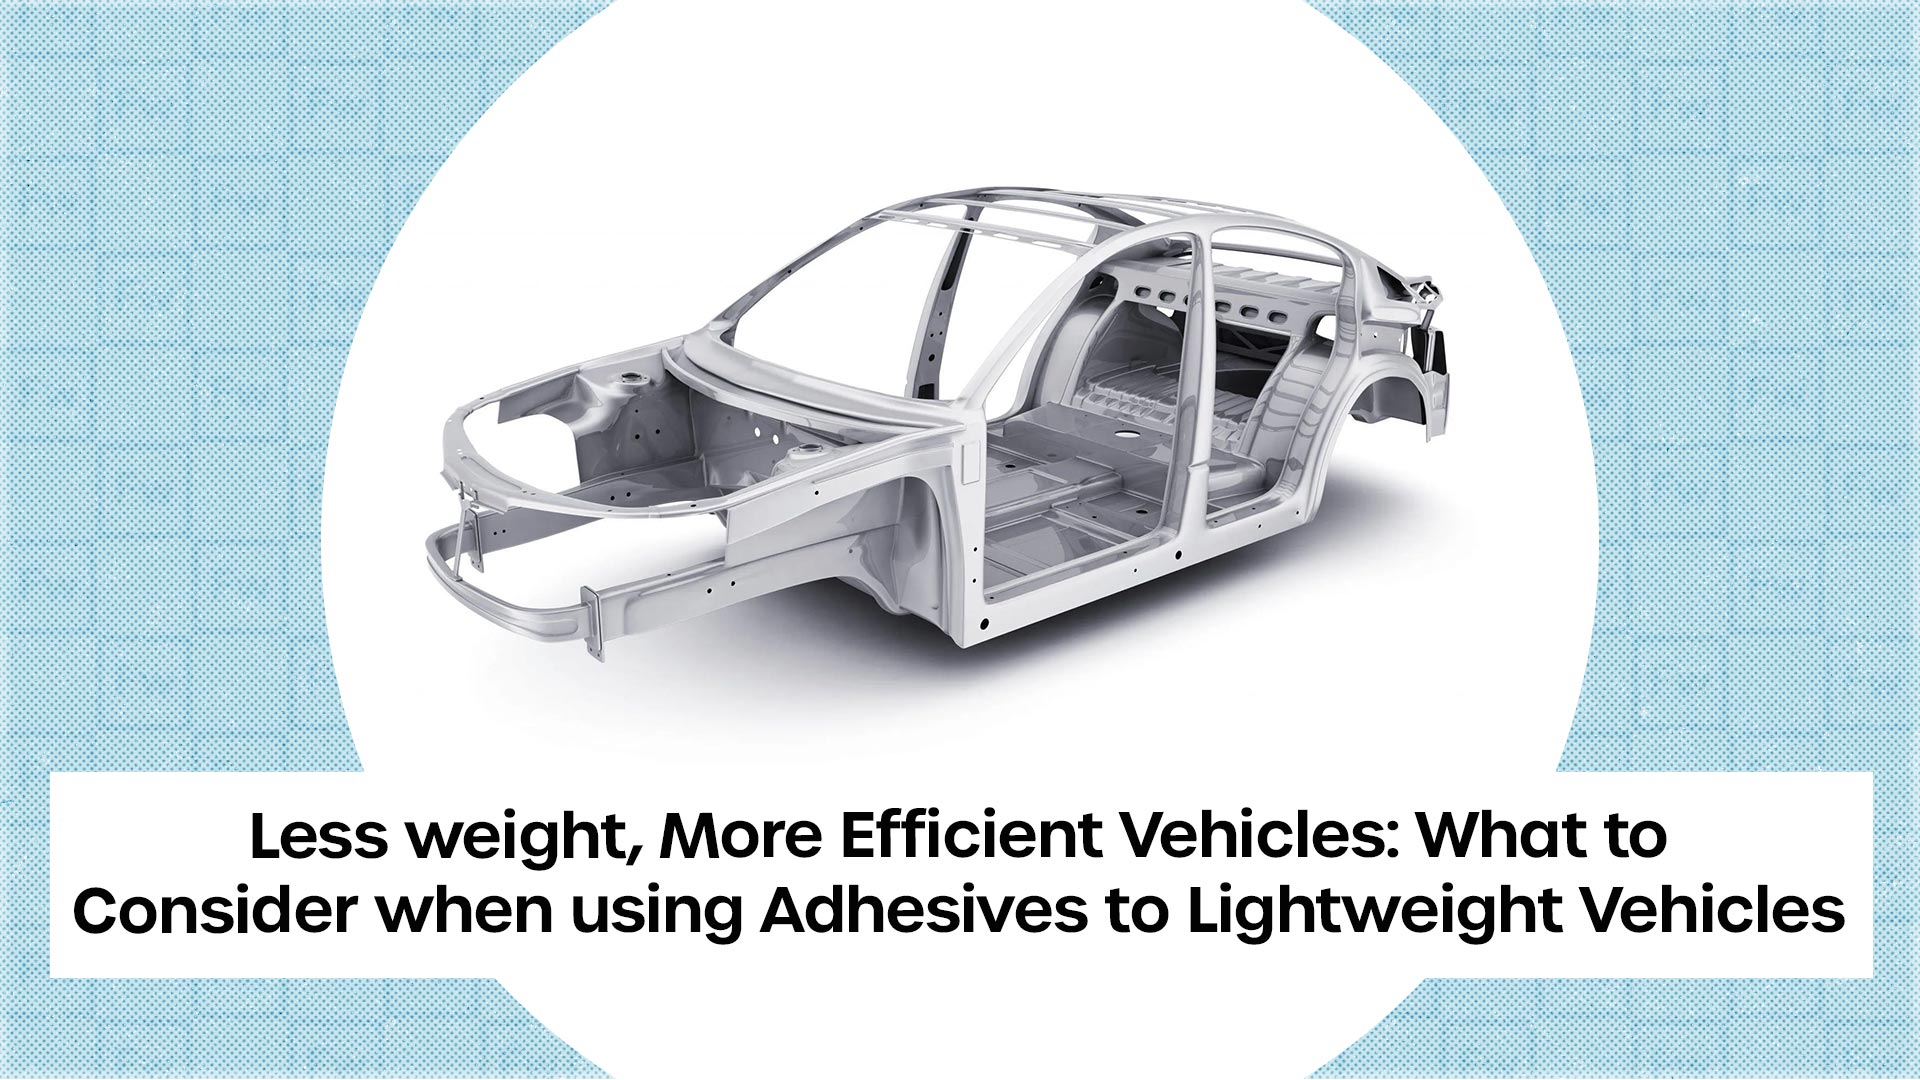 Less Weight, More Efficient Vehicles